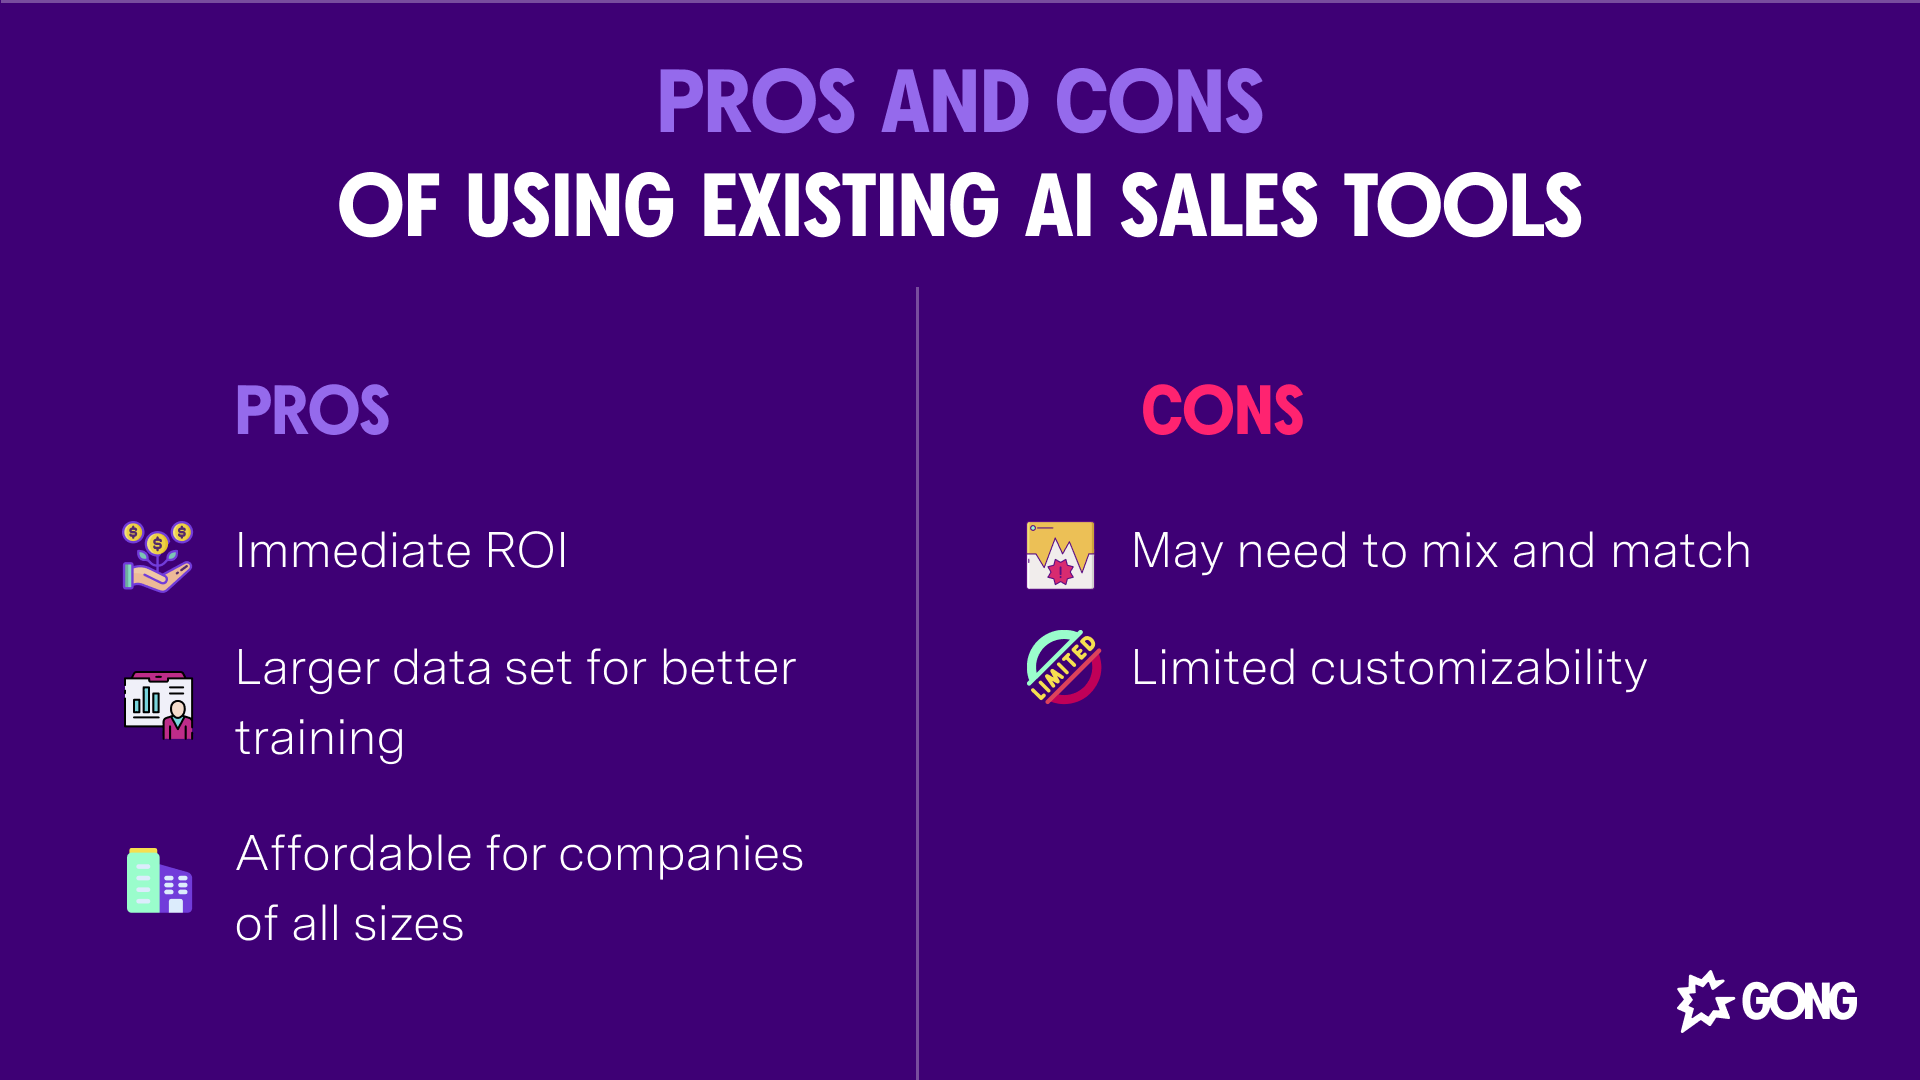 Table of the pros and cons of using existing generative AI sales tools